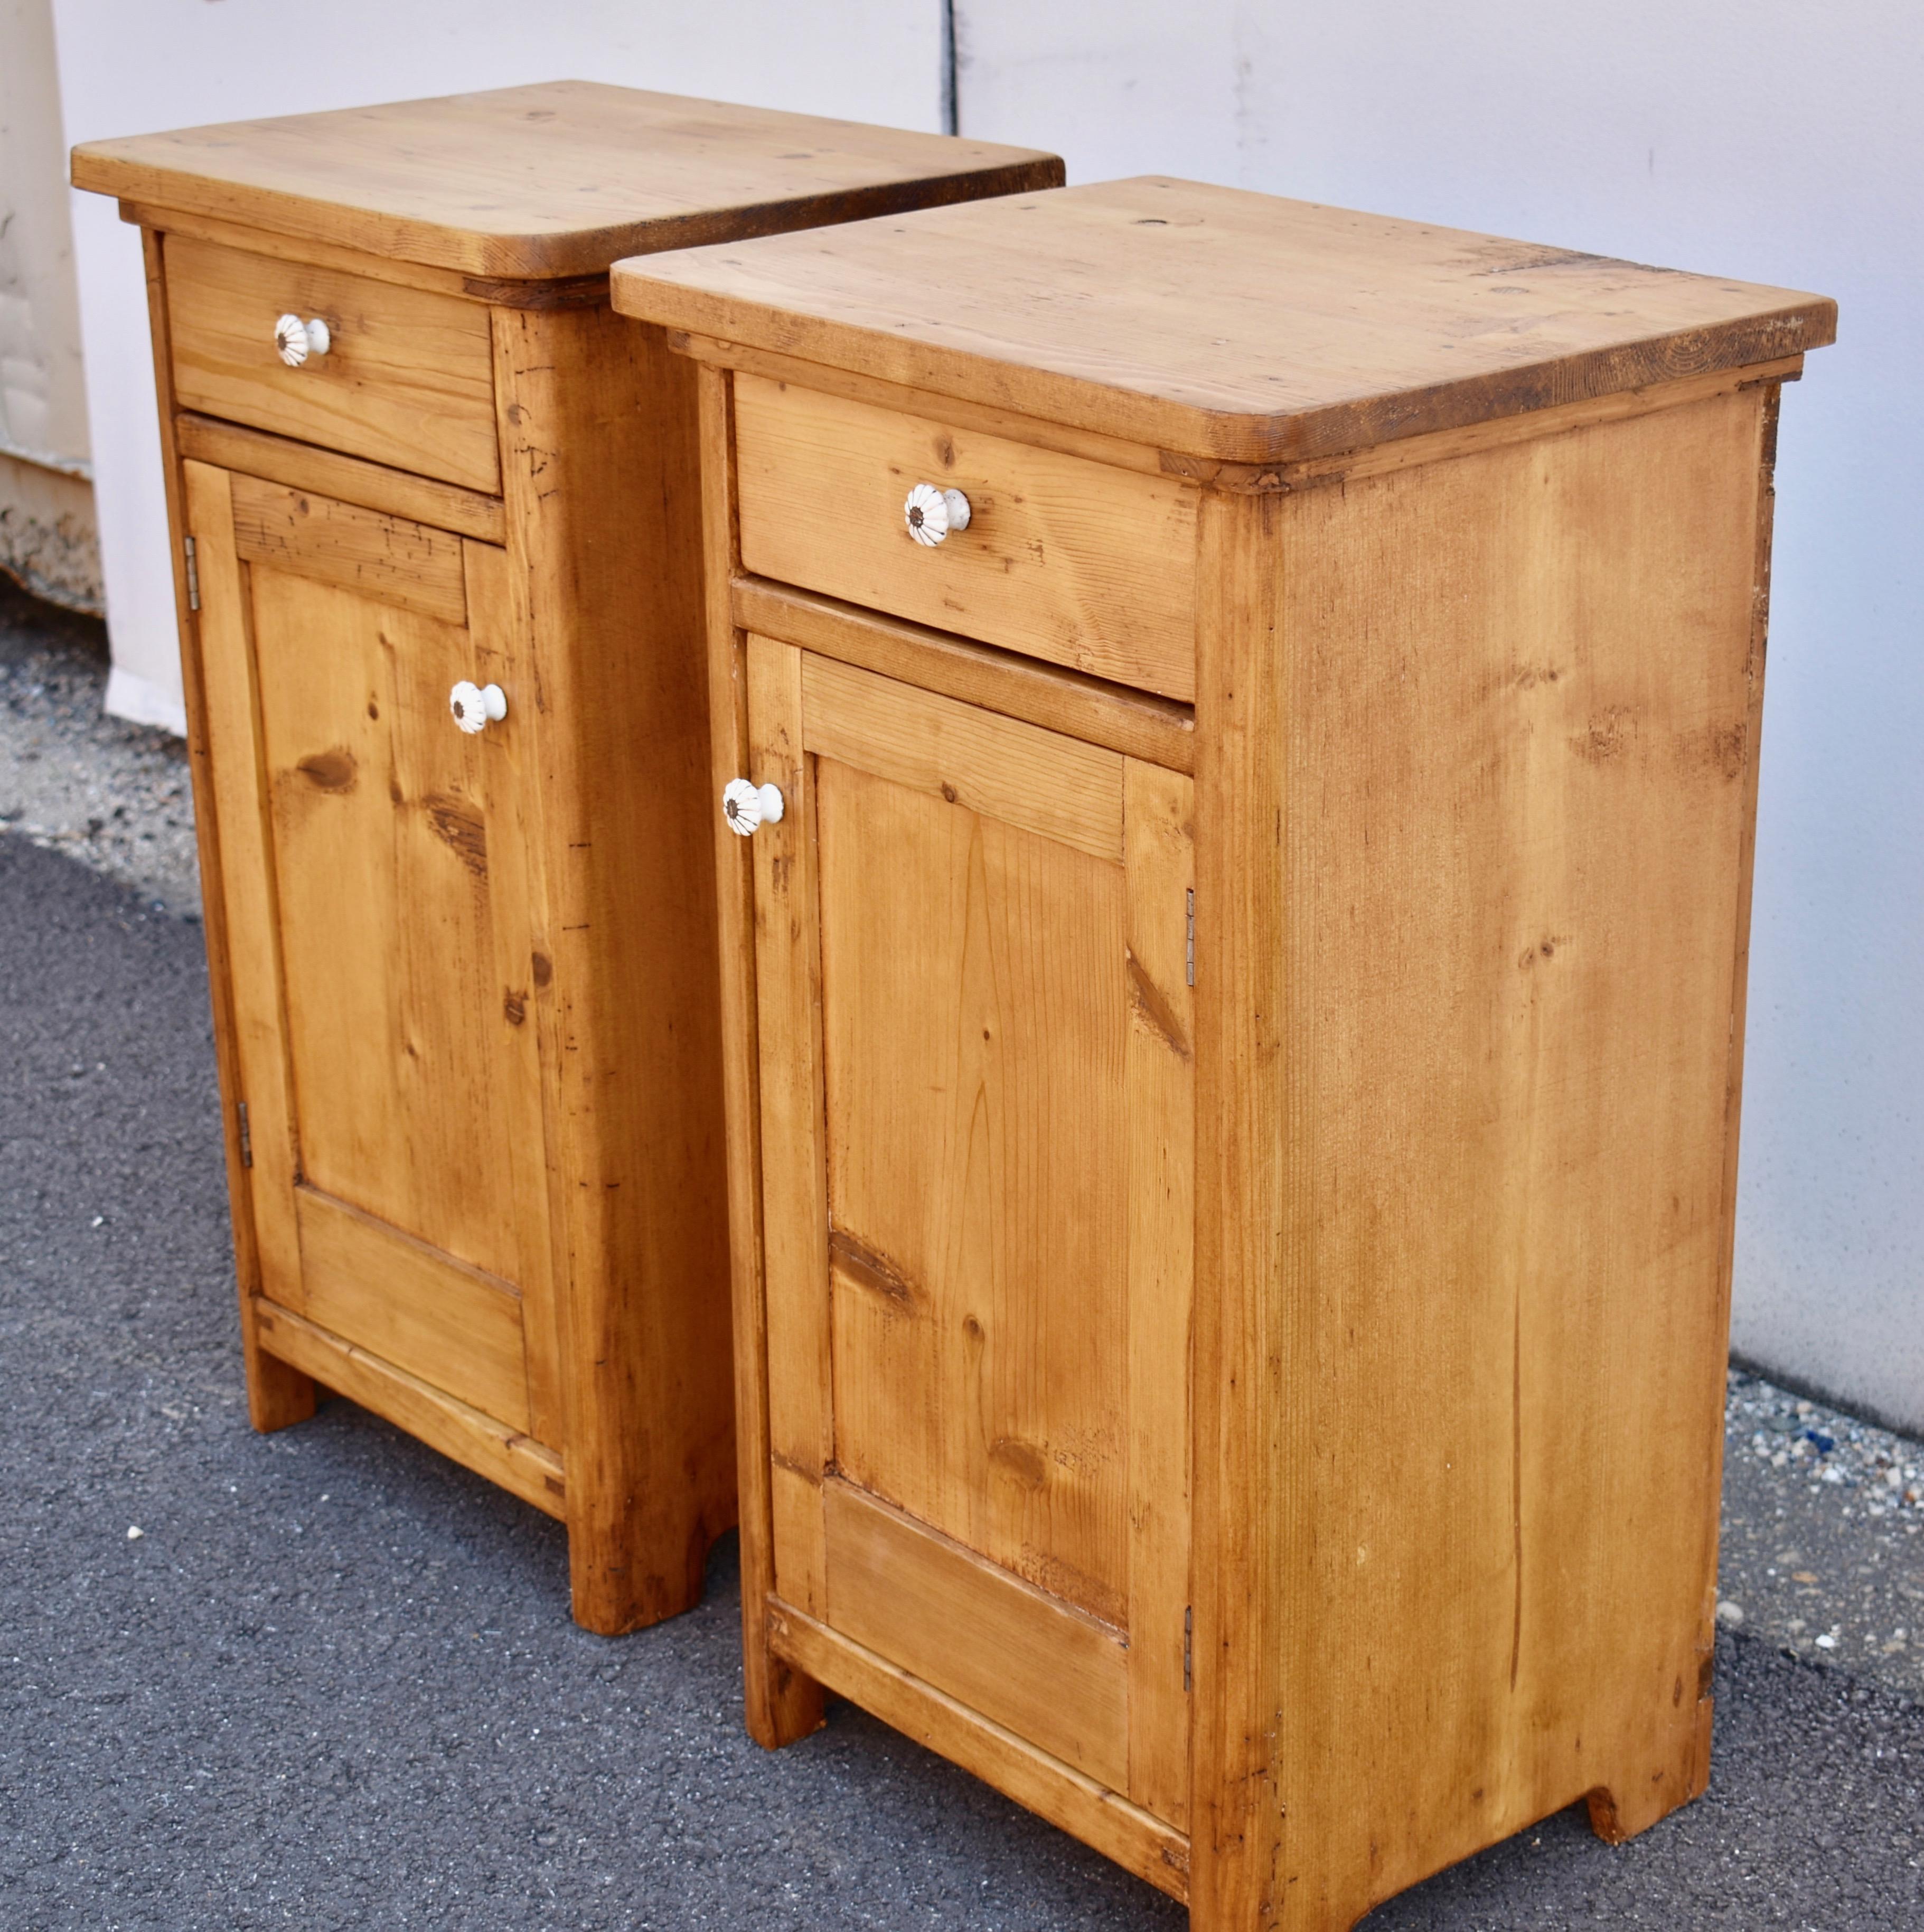 This is a matched pair of heavy pine nightstands with thick, sturdy tops, rounded at the front corners.  The drawers have lovely hand-cut dovetails and the doors have a single flat panel as is customary with such pieces.  There is a single shelf to